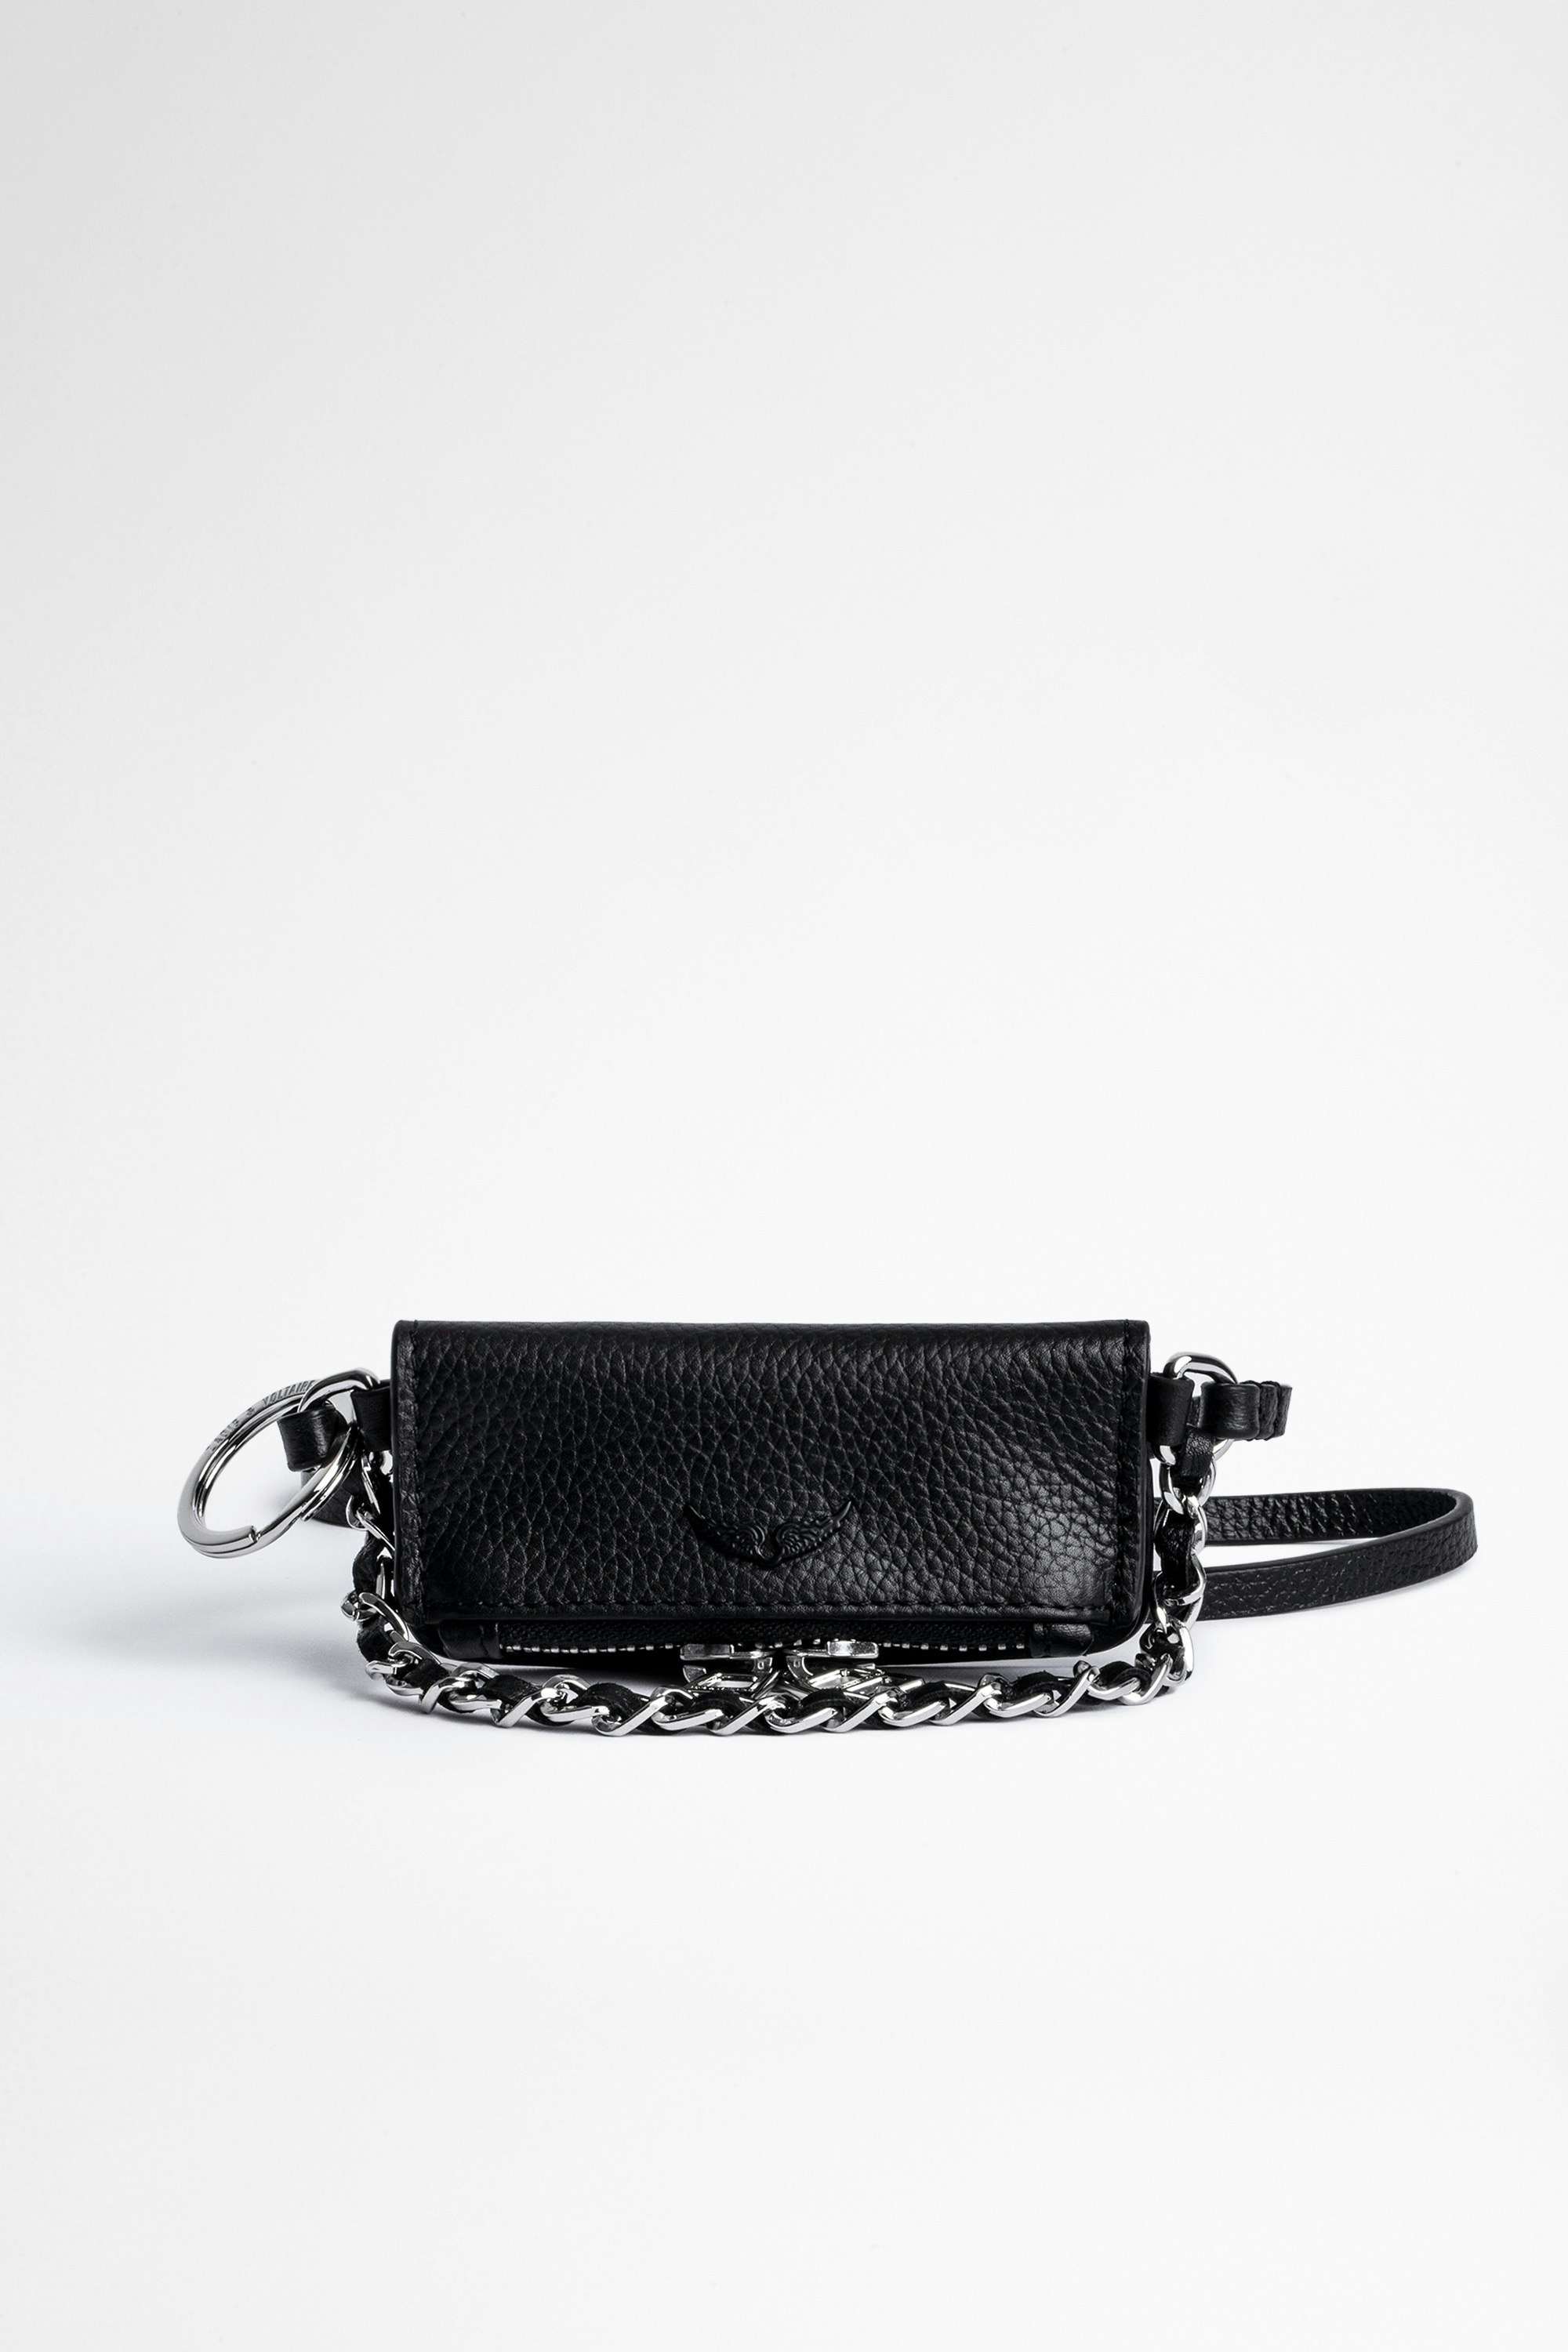 Grained Leather Grigri Charm Rock Clutch Miniature black leather version of the Rock clutch